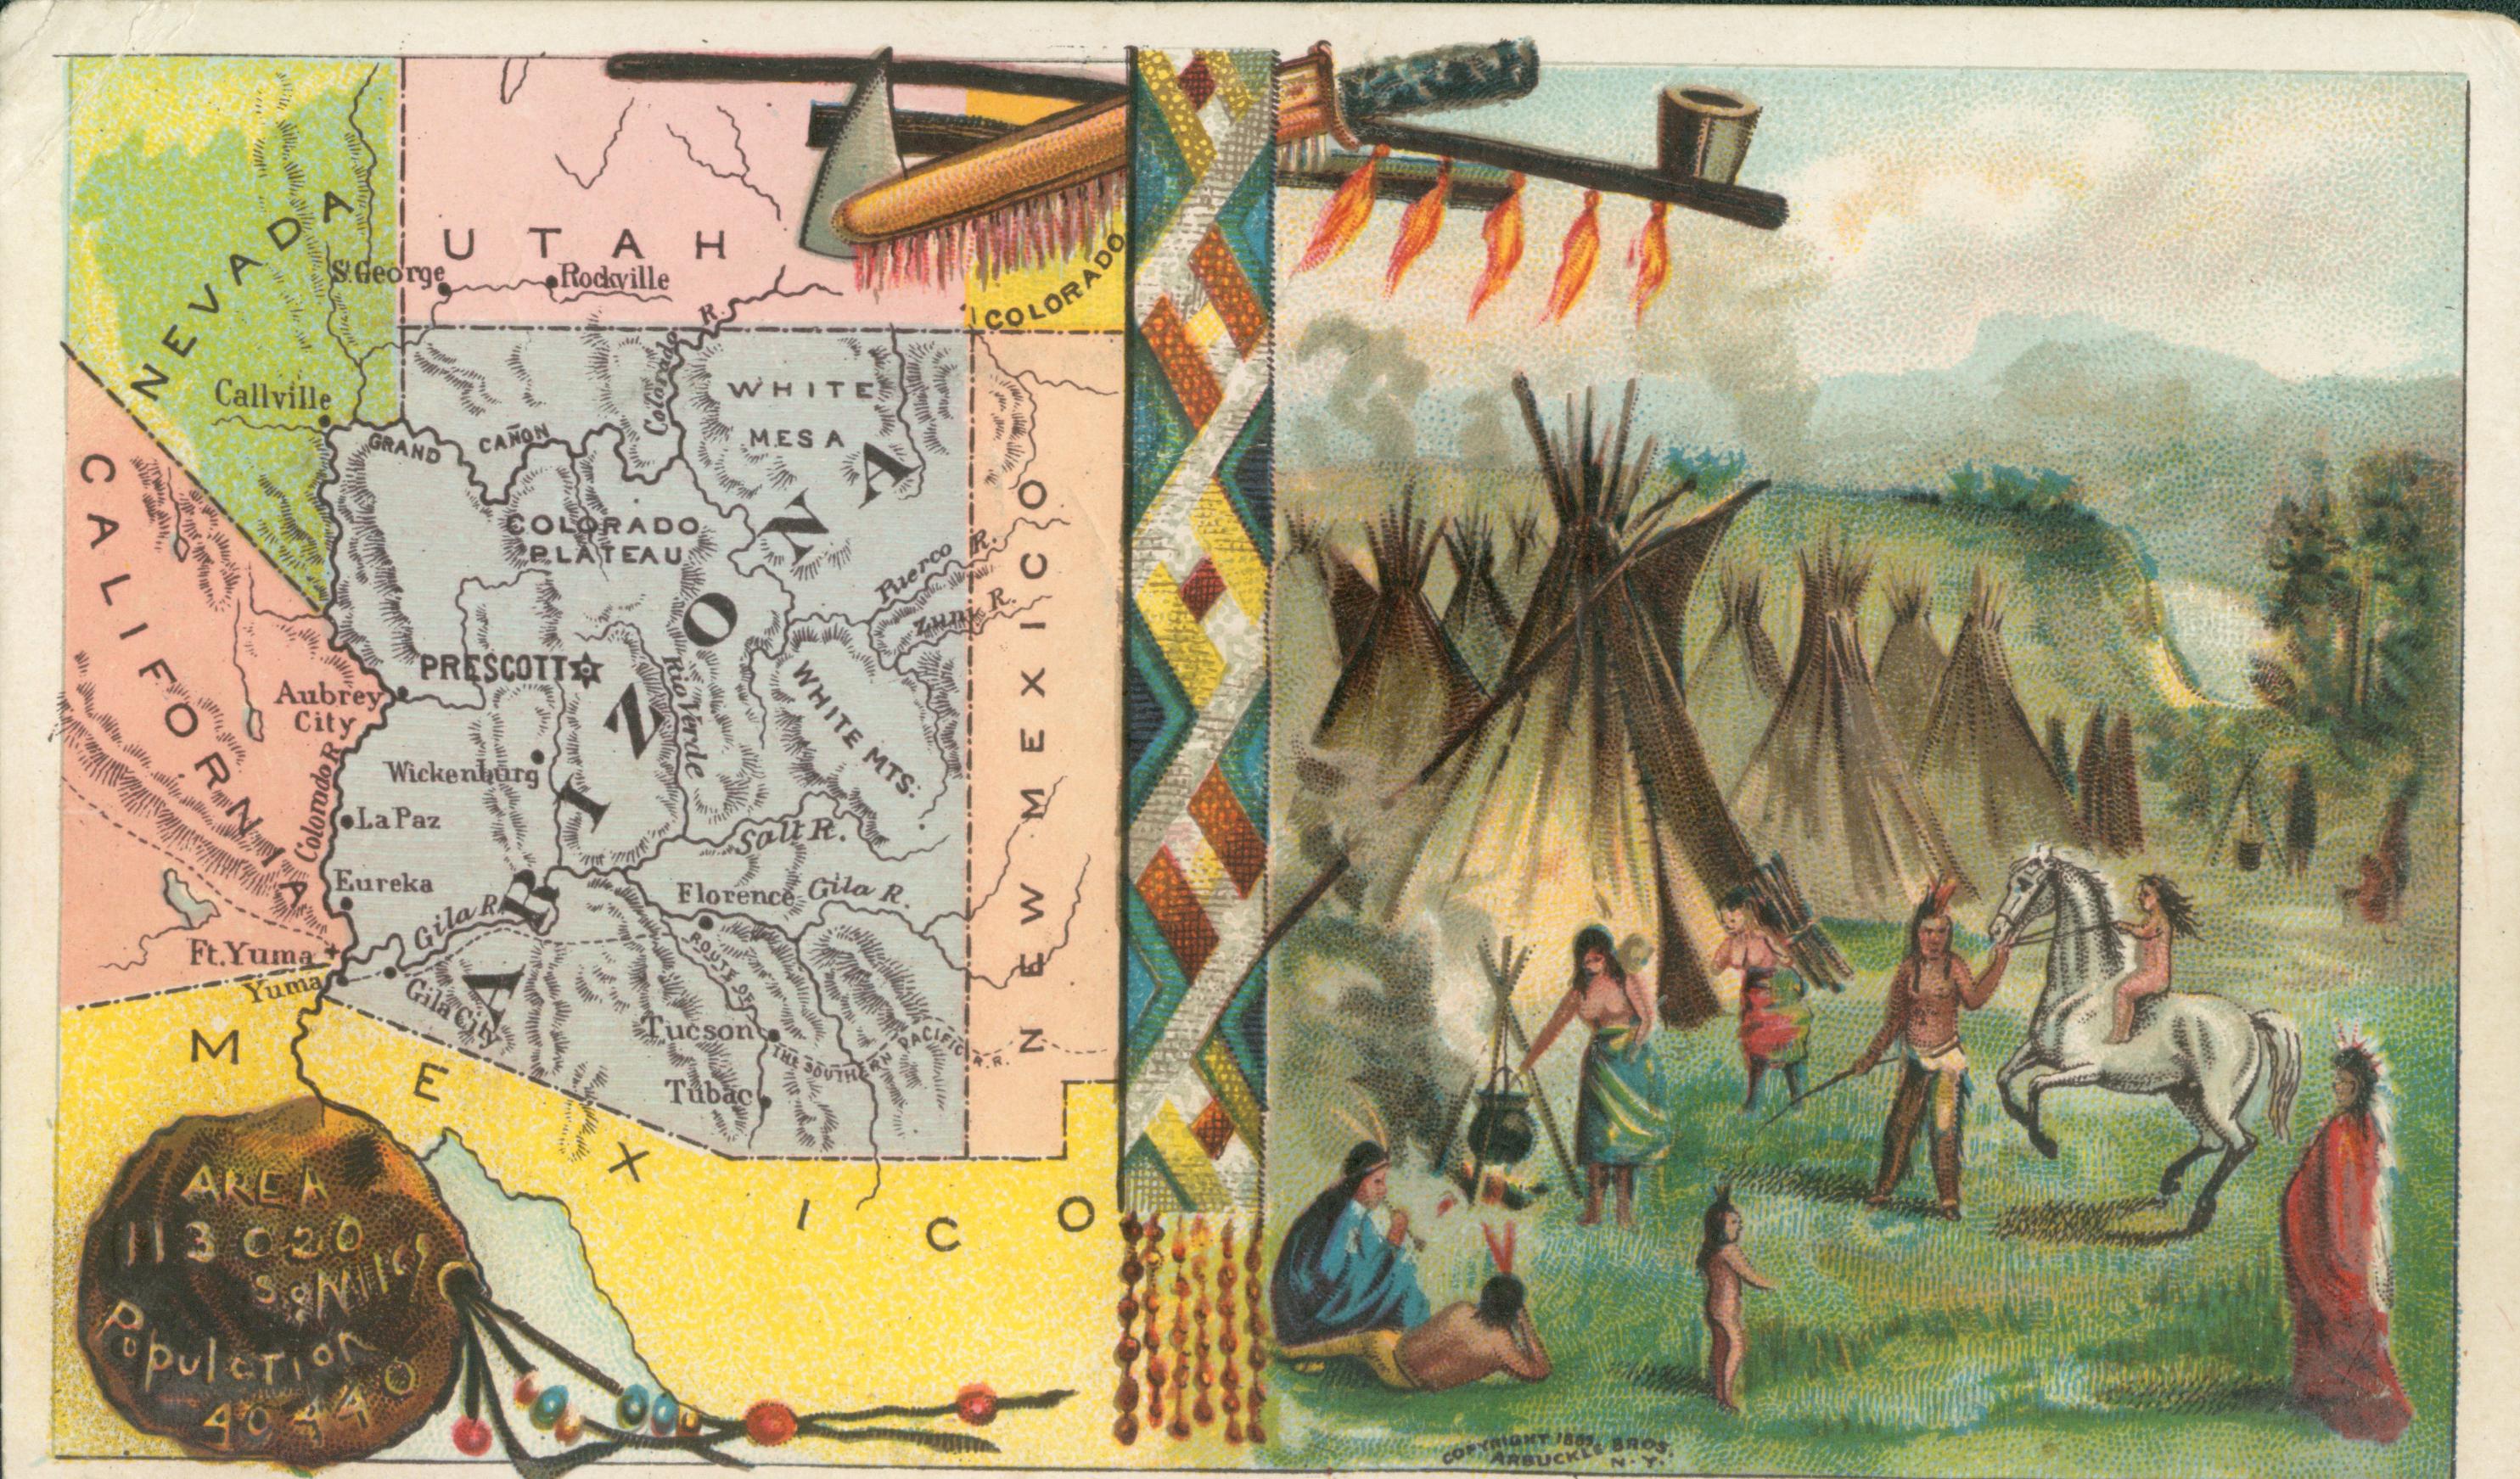 The left side of this trade card shows a map of Arizona and the surrounding states, while the right shows a group of Native Americans standing amongst several tepees.